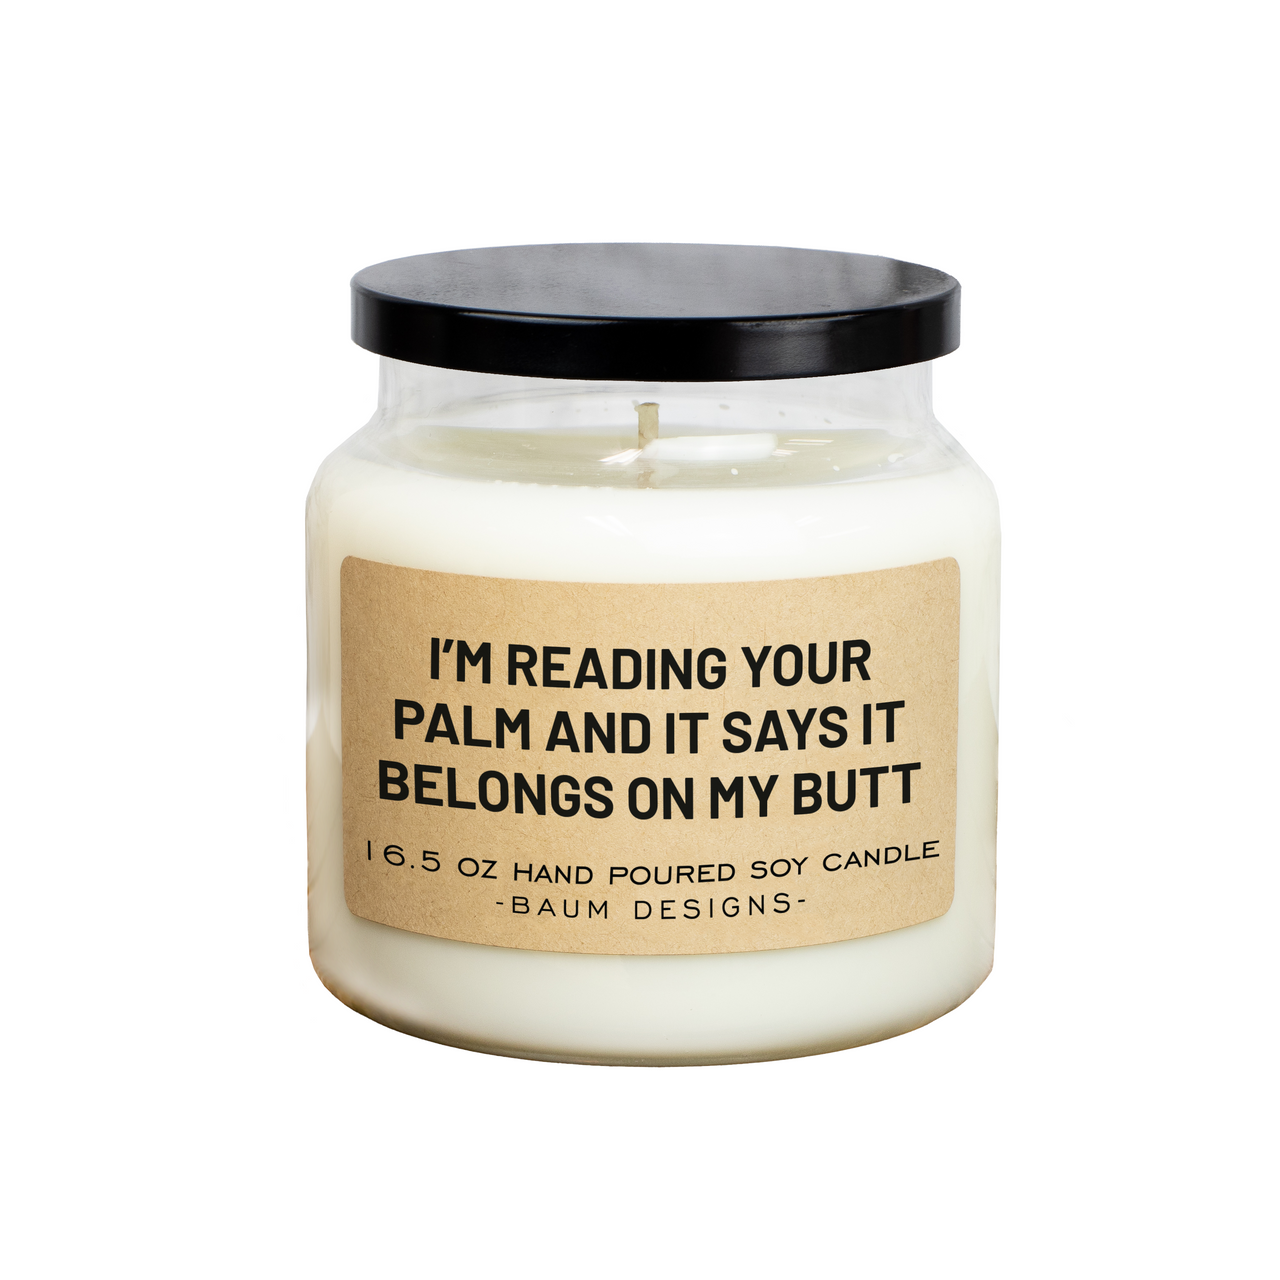 I'm Reading Your Palm And It Says It Belongs On My Butt Soy Candle Baum Designs